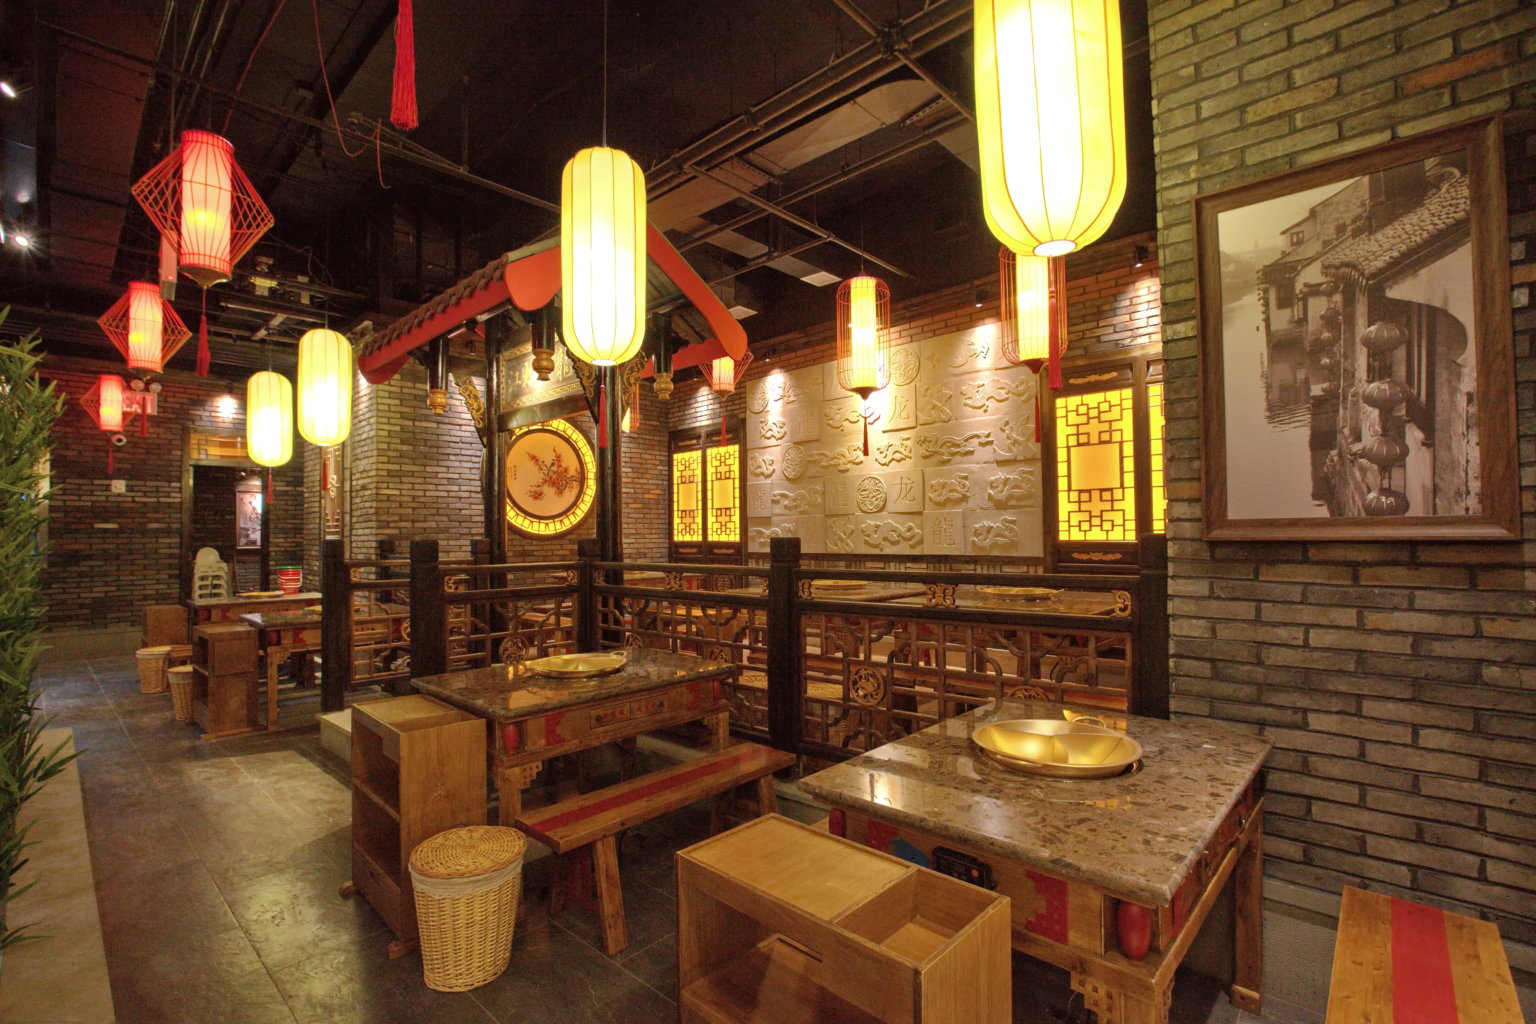 Famous Chinese Hot Pot Chain Opens First Us Restaurant At Tangram In